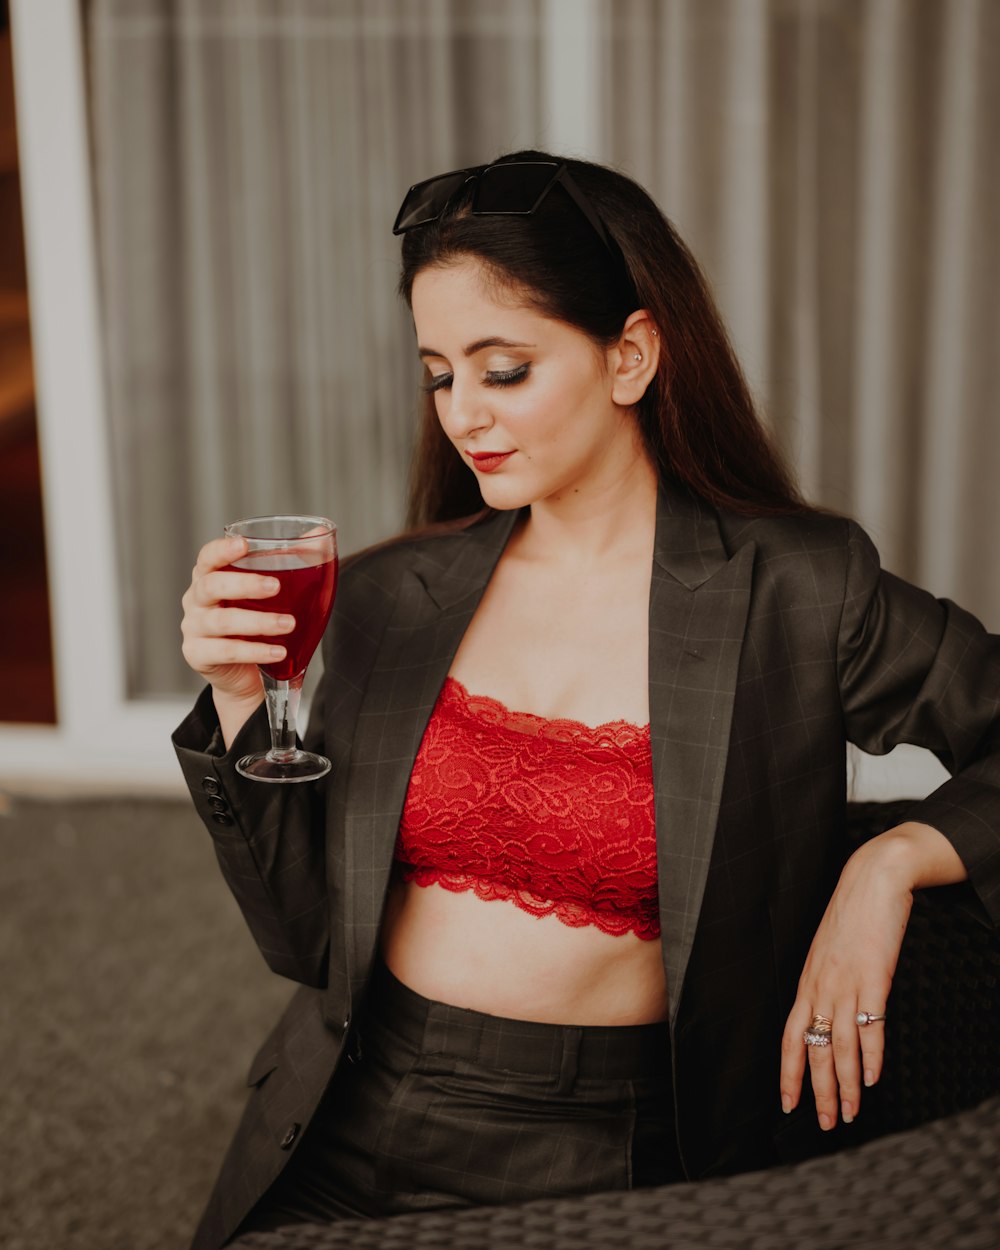 Woman in red lace brassiere and black blazer holding clear drinking glass  photo – Free Human Image on Unsplash